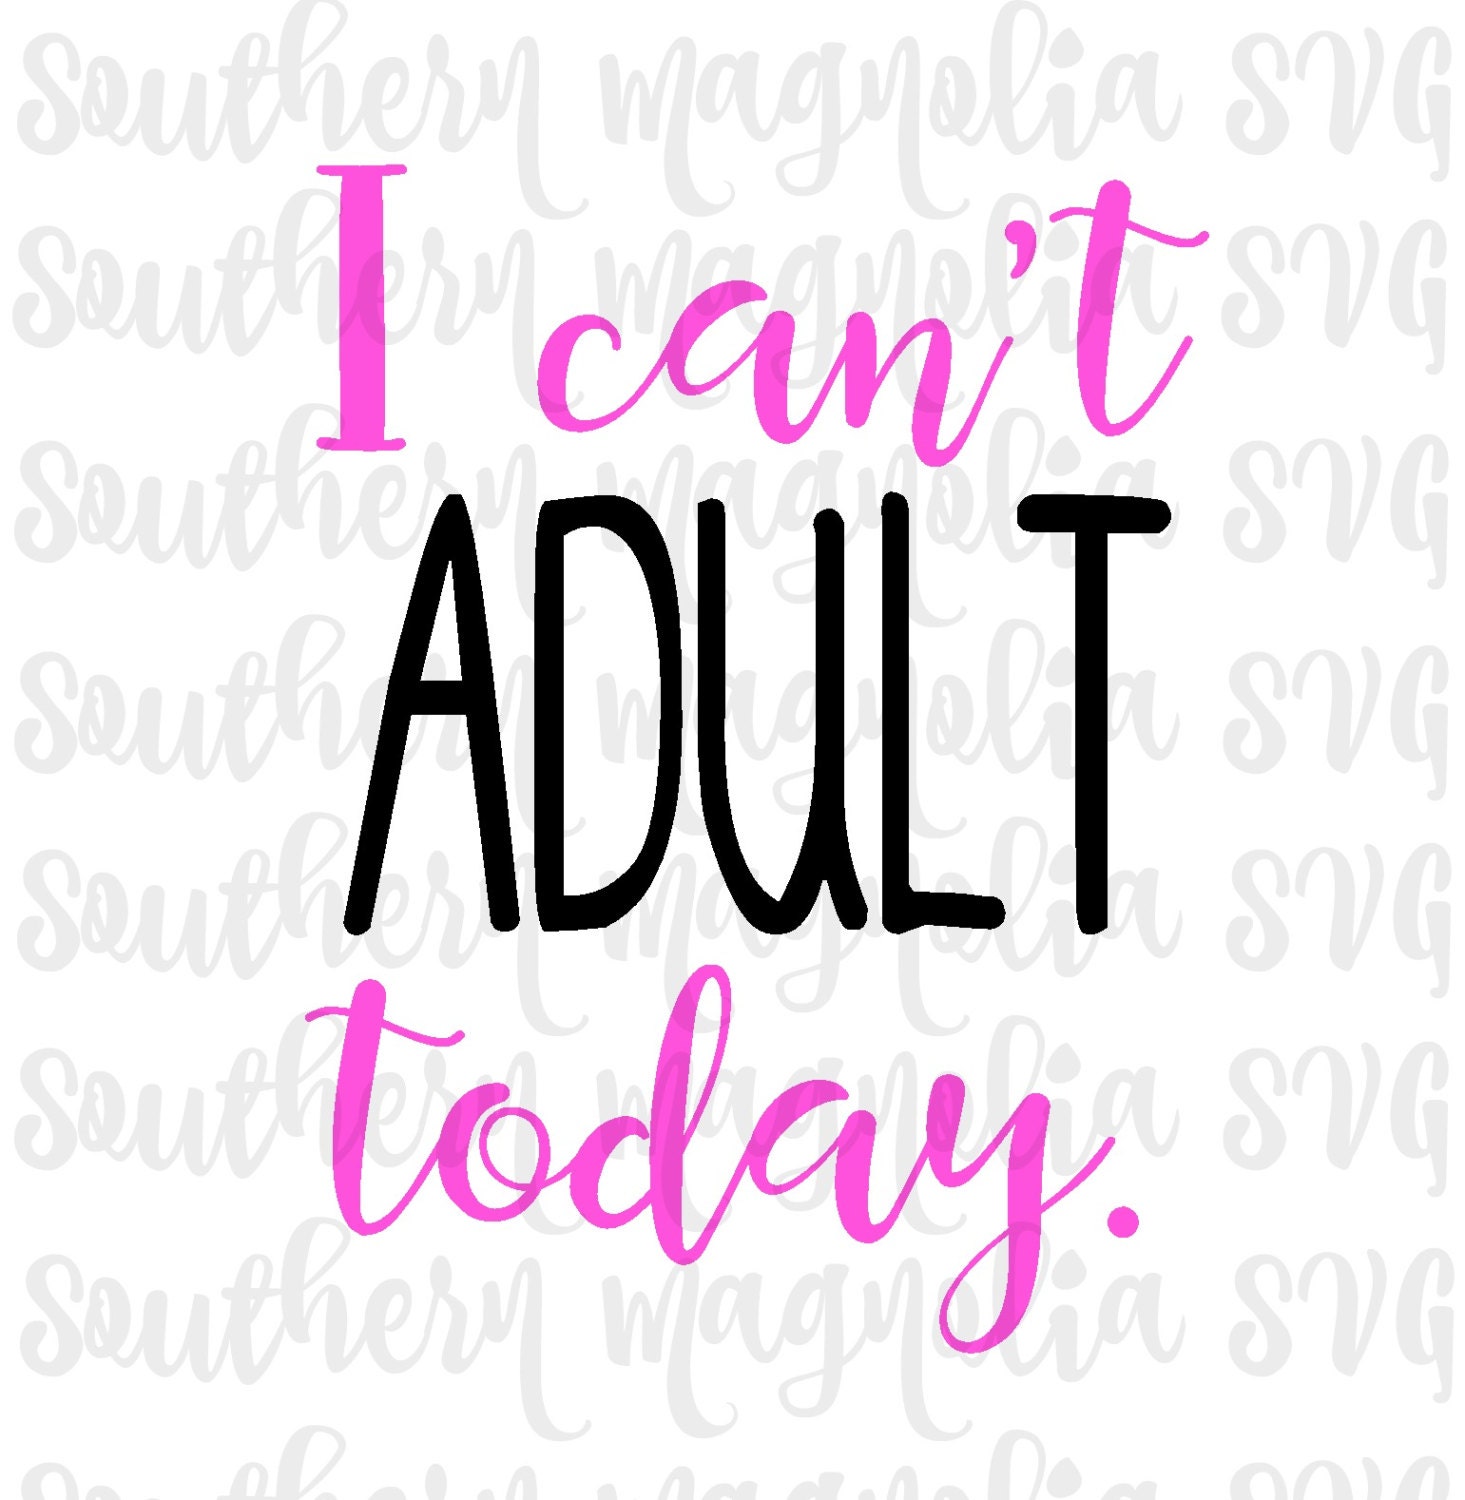 Download I Can't Adult Today Silhouette Cricut Cut File SVG